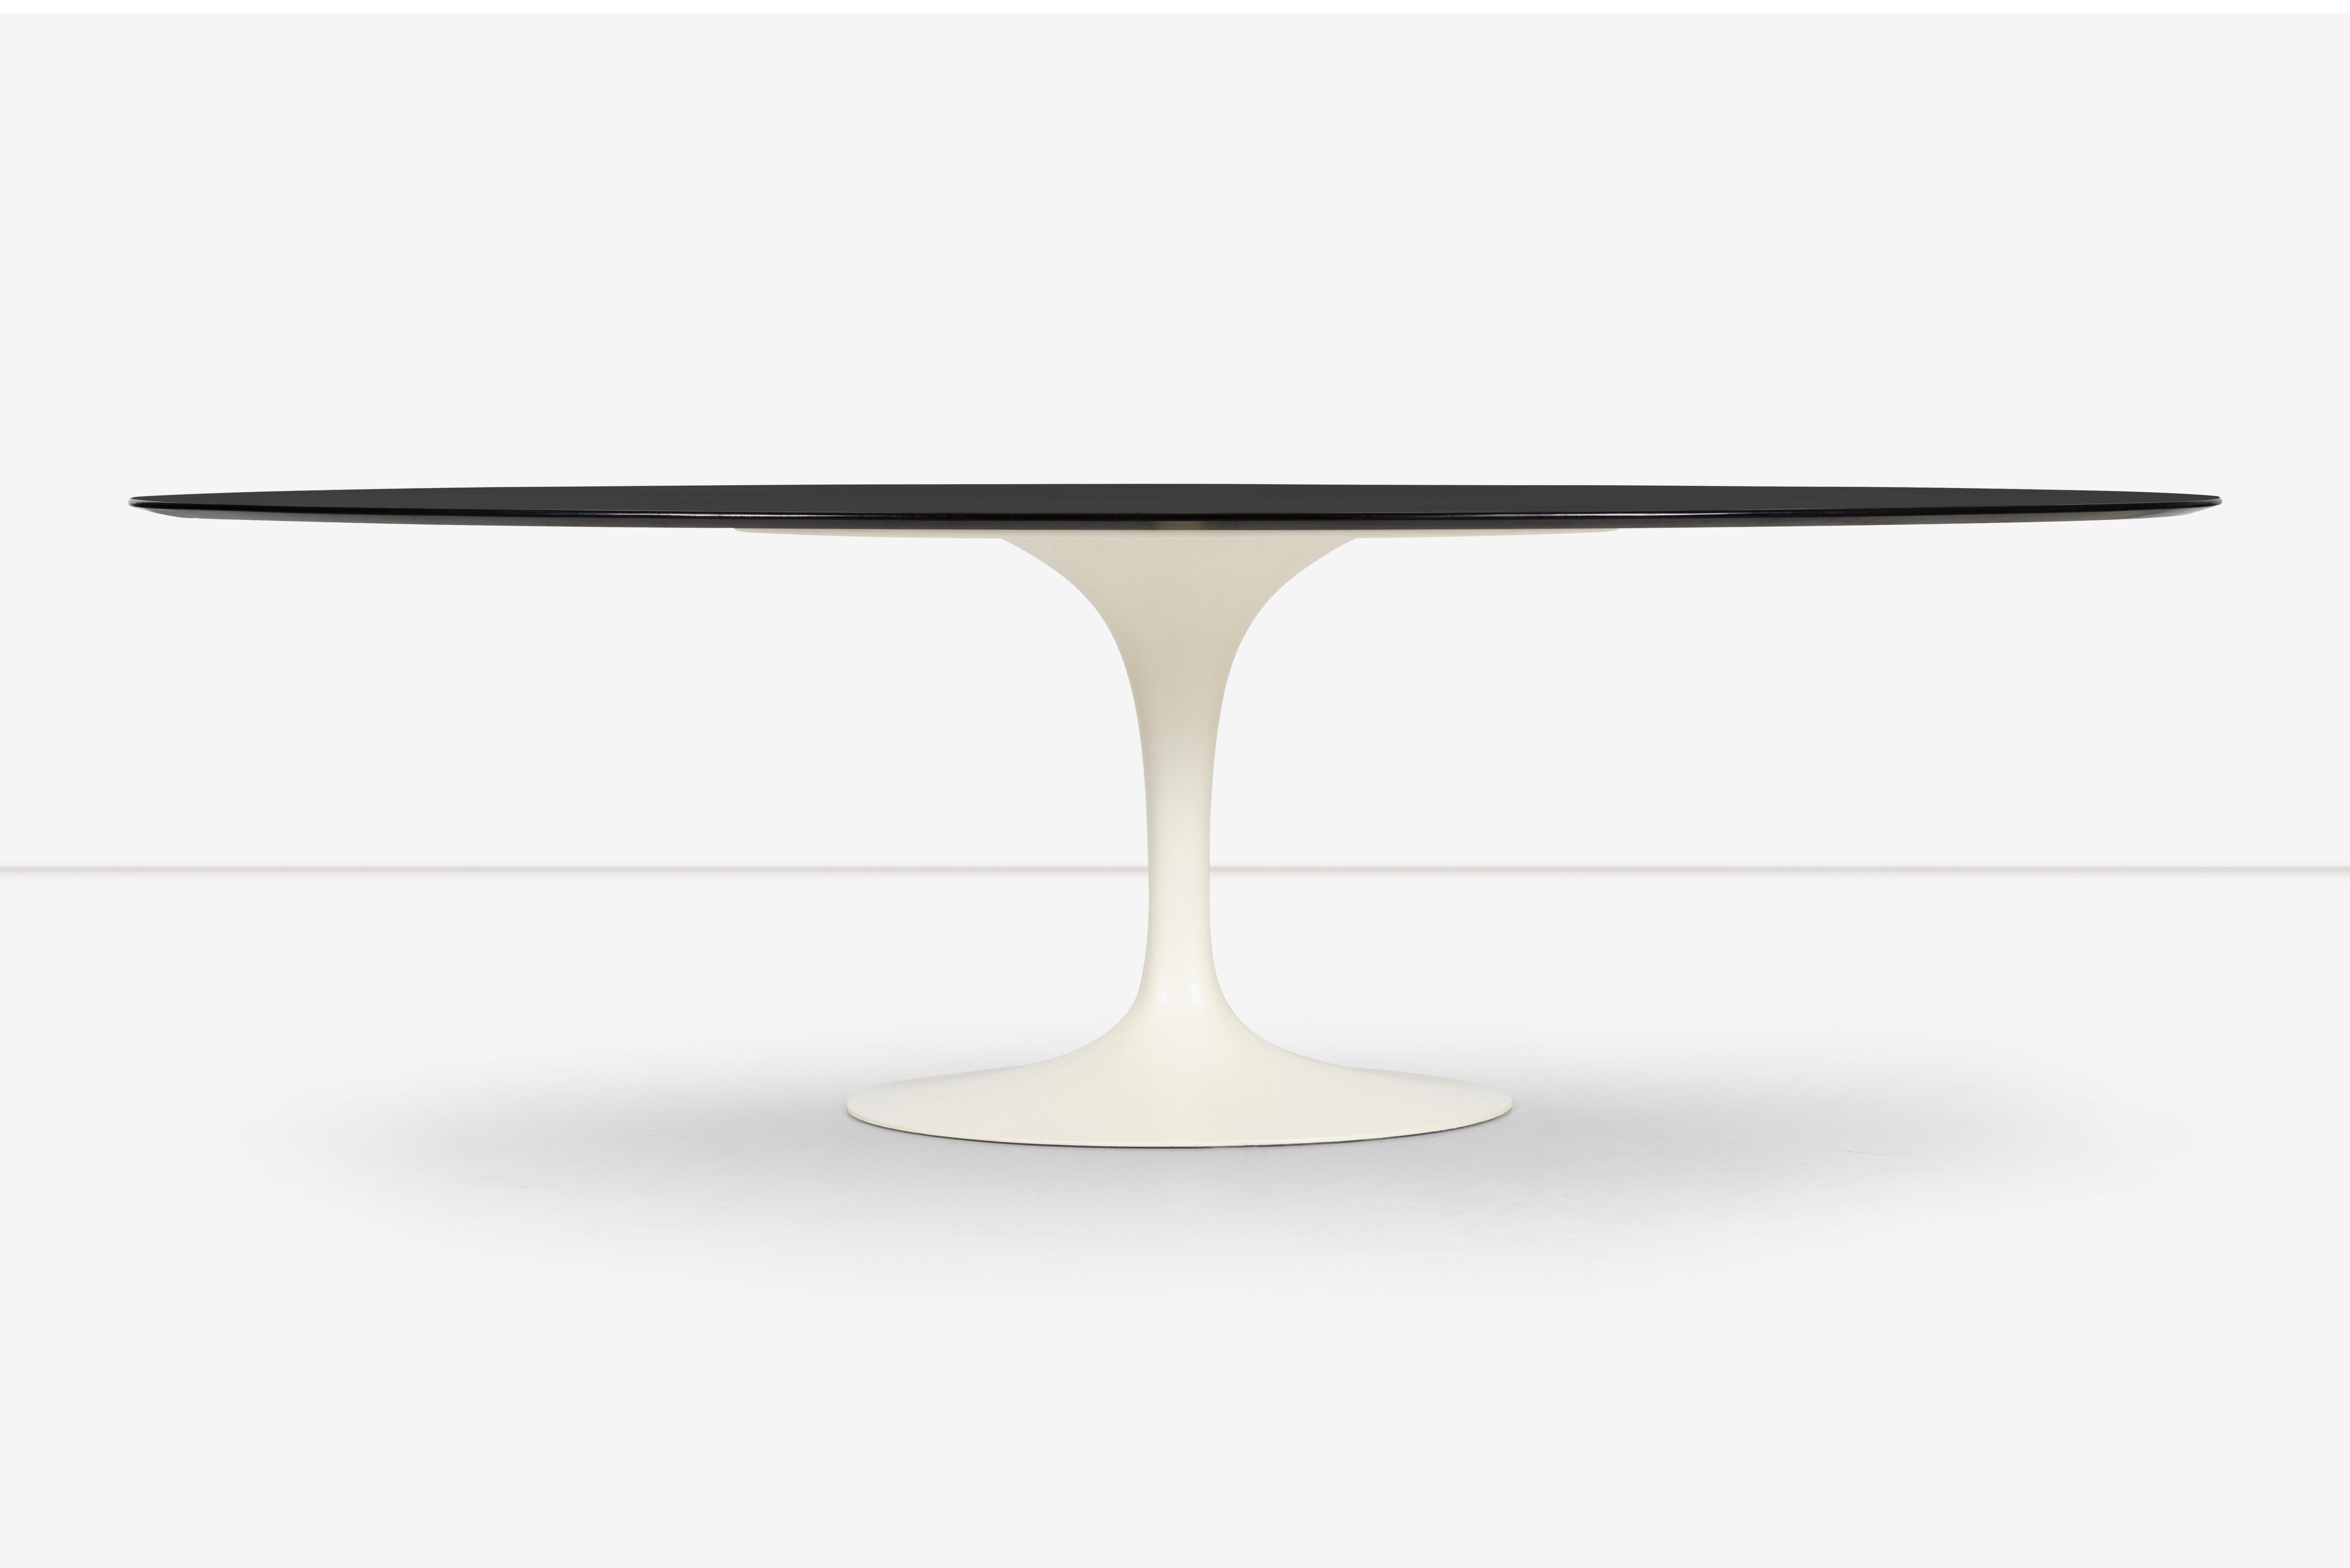 The Eero Saarinen Tulip Table for Knoll is a classic and iconic piece of furniture that has been a mainstay in modern design since its creation in the 1950s. The table's distinctive design features a sleek and elegant cream colored pedestal base